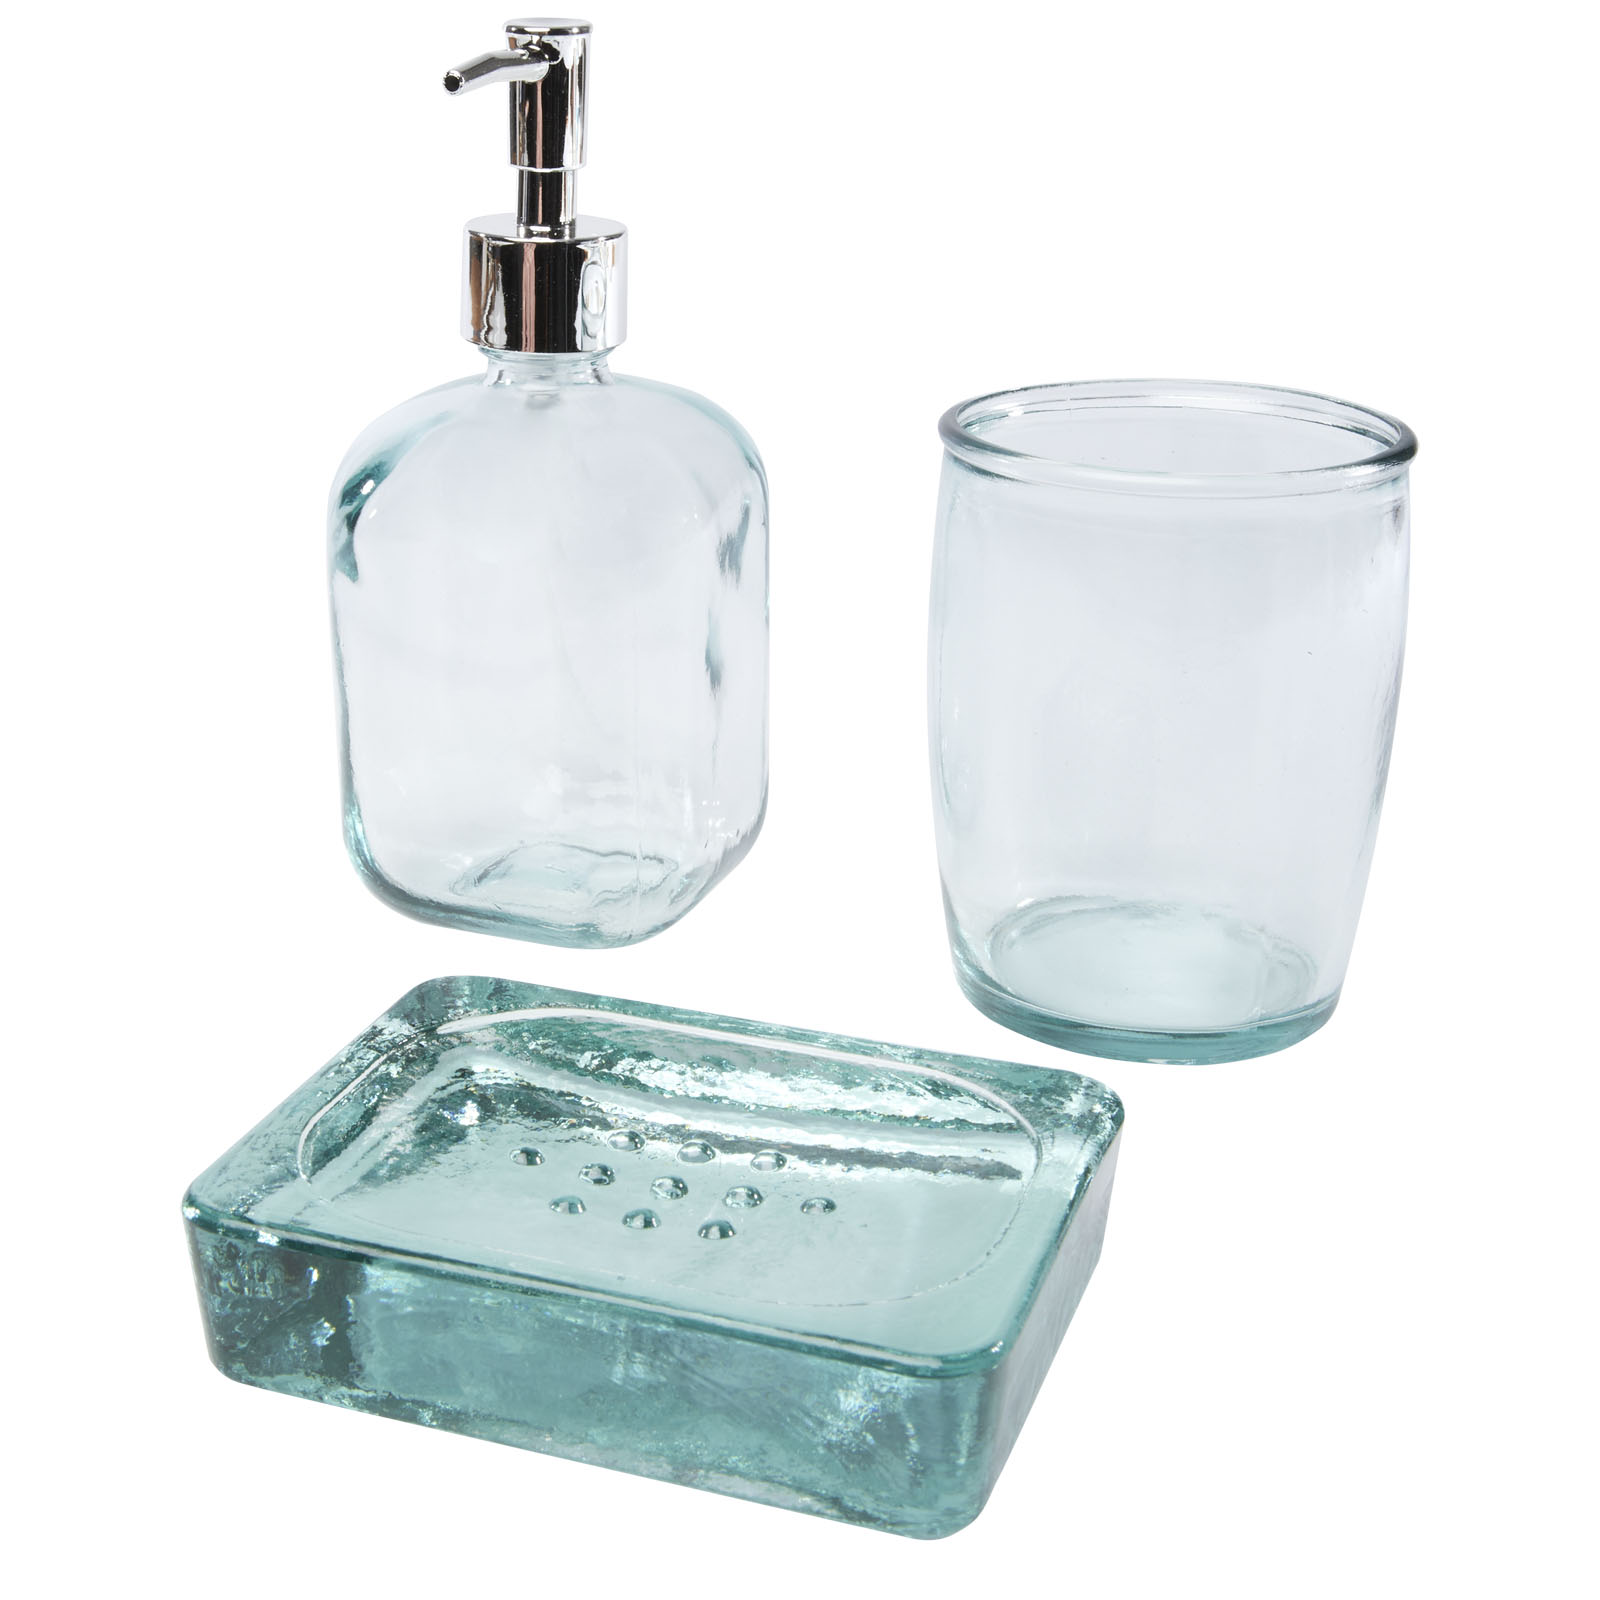 Advertising Home Accessories - Jabony 3-piece recycled glass bathroom set - 0